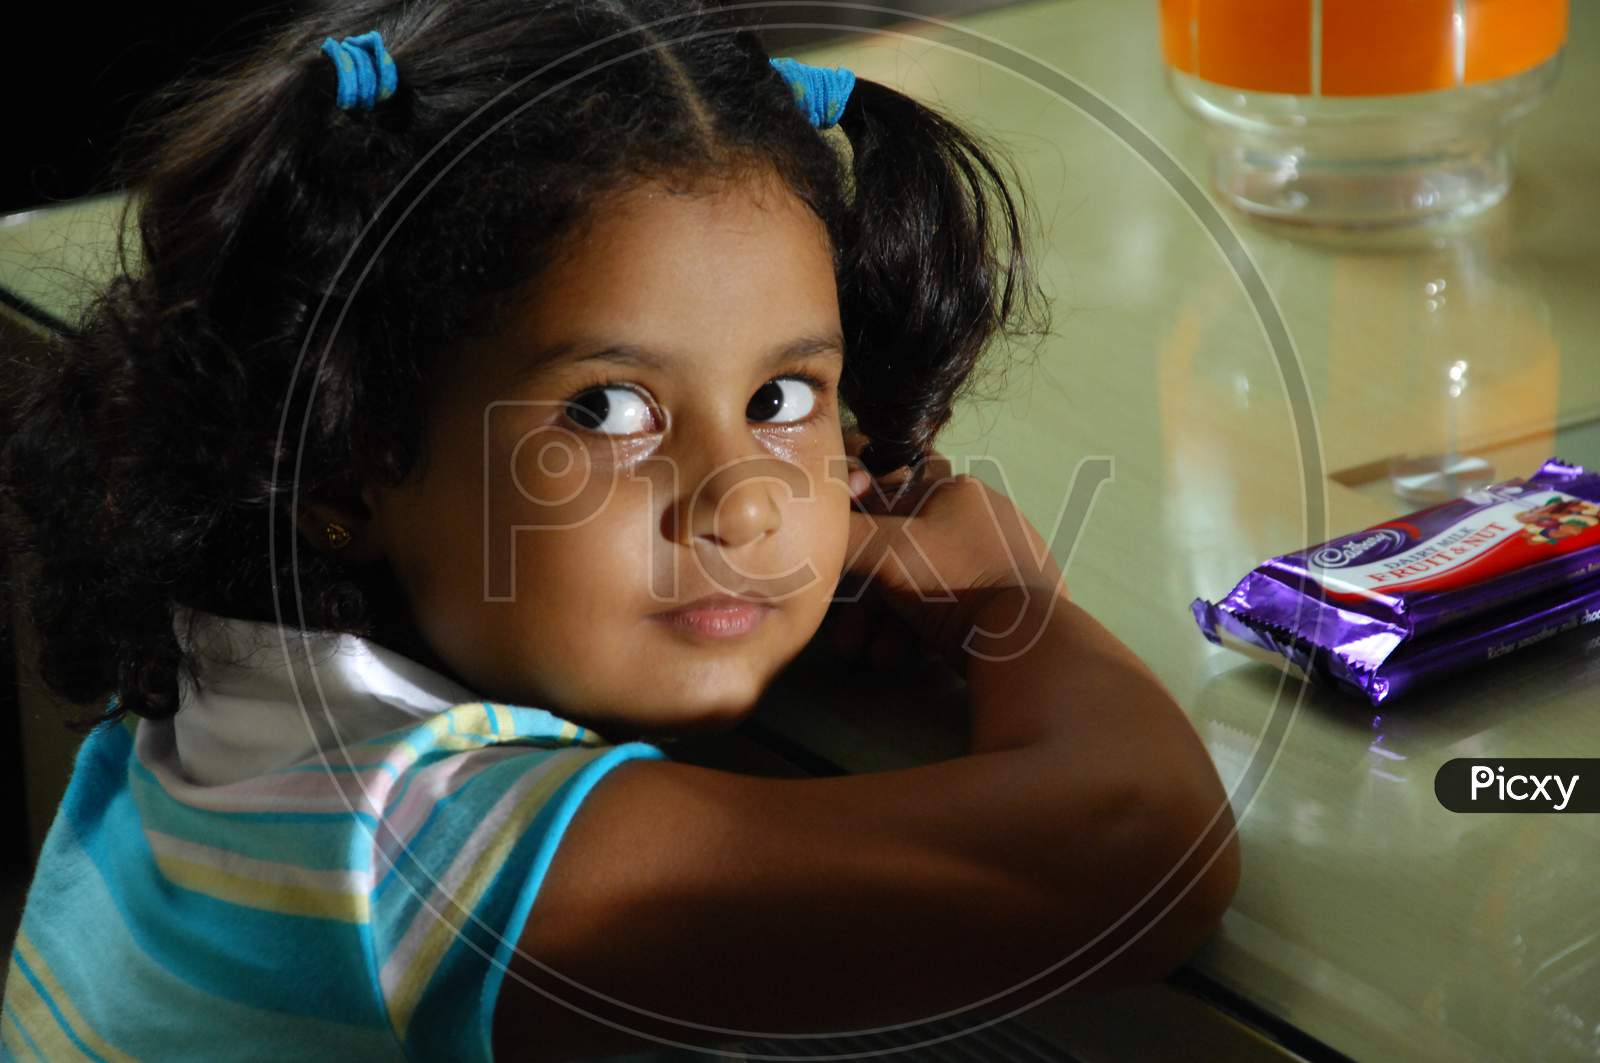 Young Girl Child At a Dining Table